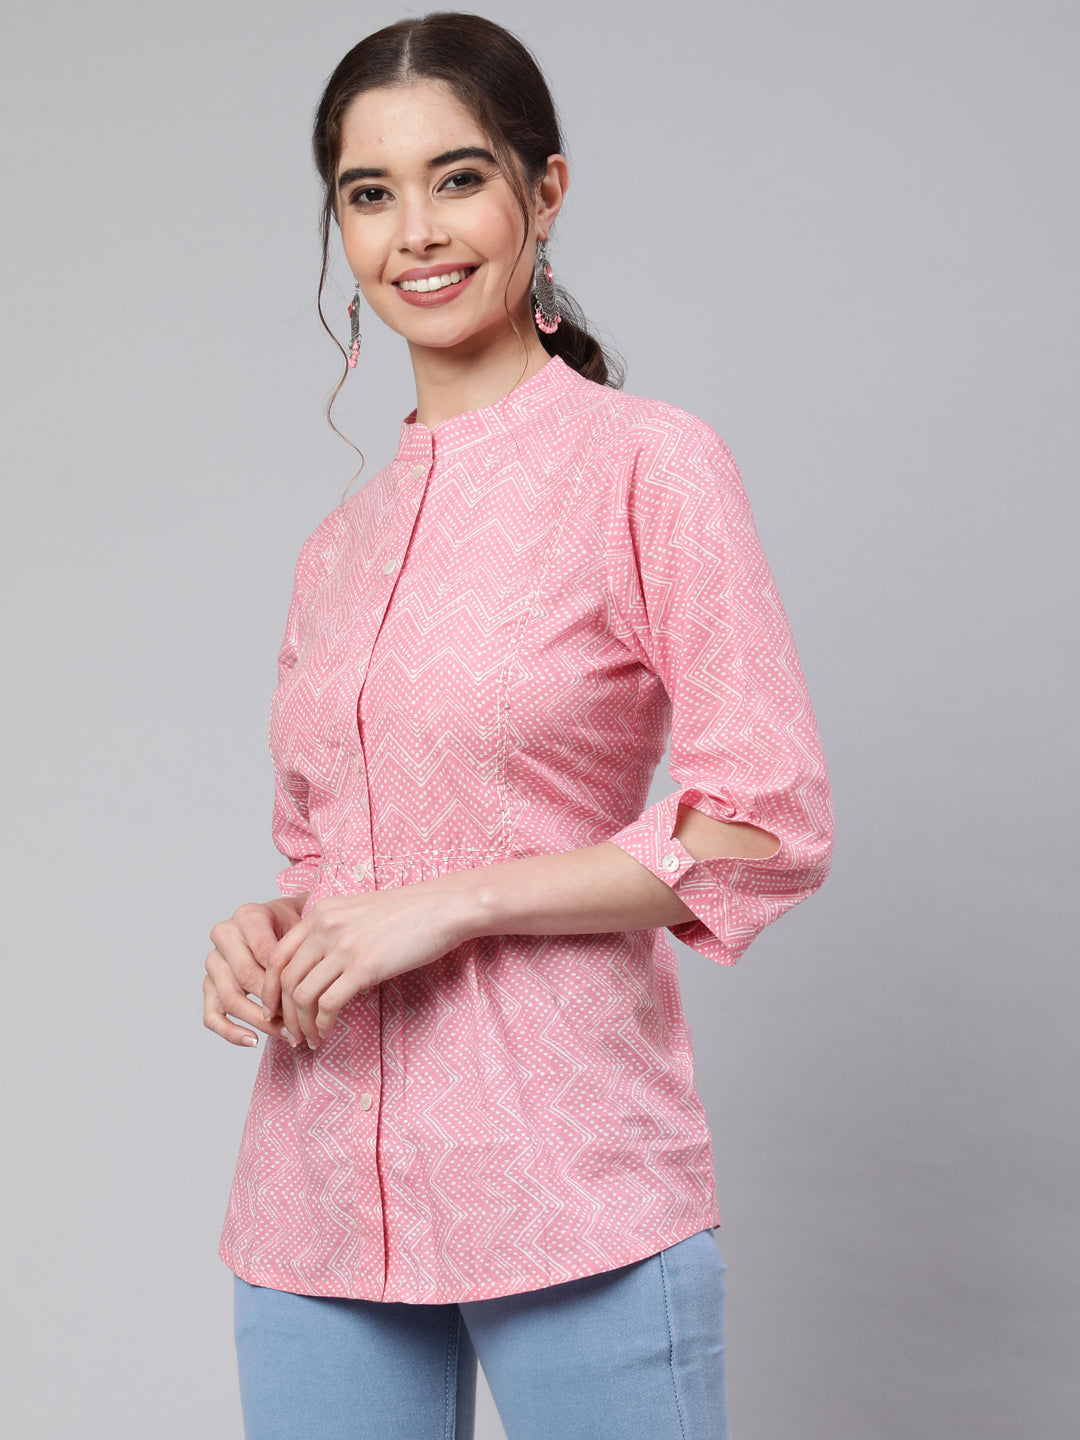 Pink Zigzag Embroidered Printed Ethnic Shirt